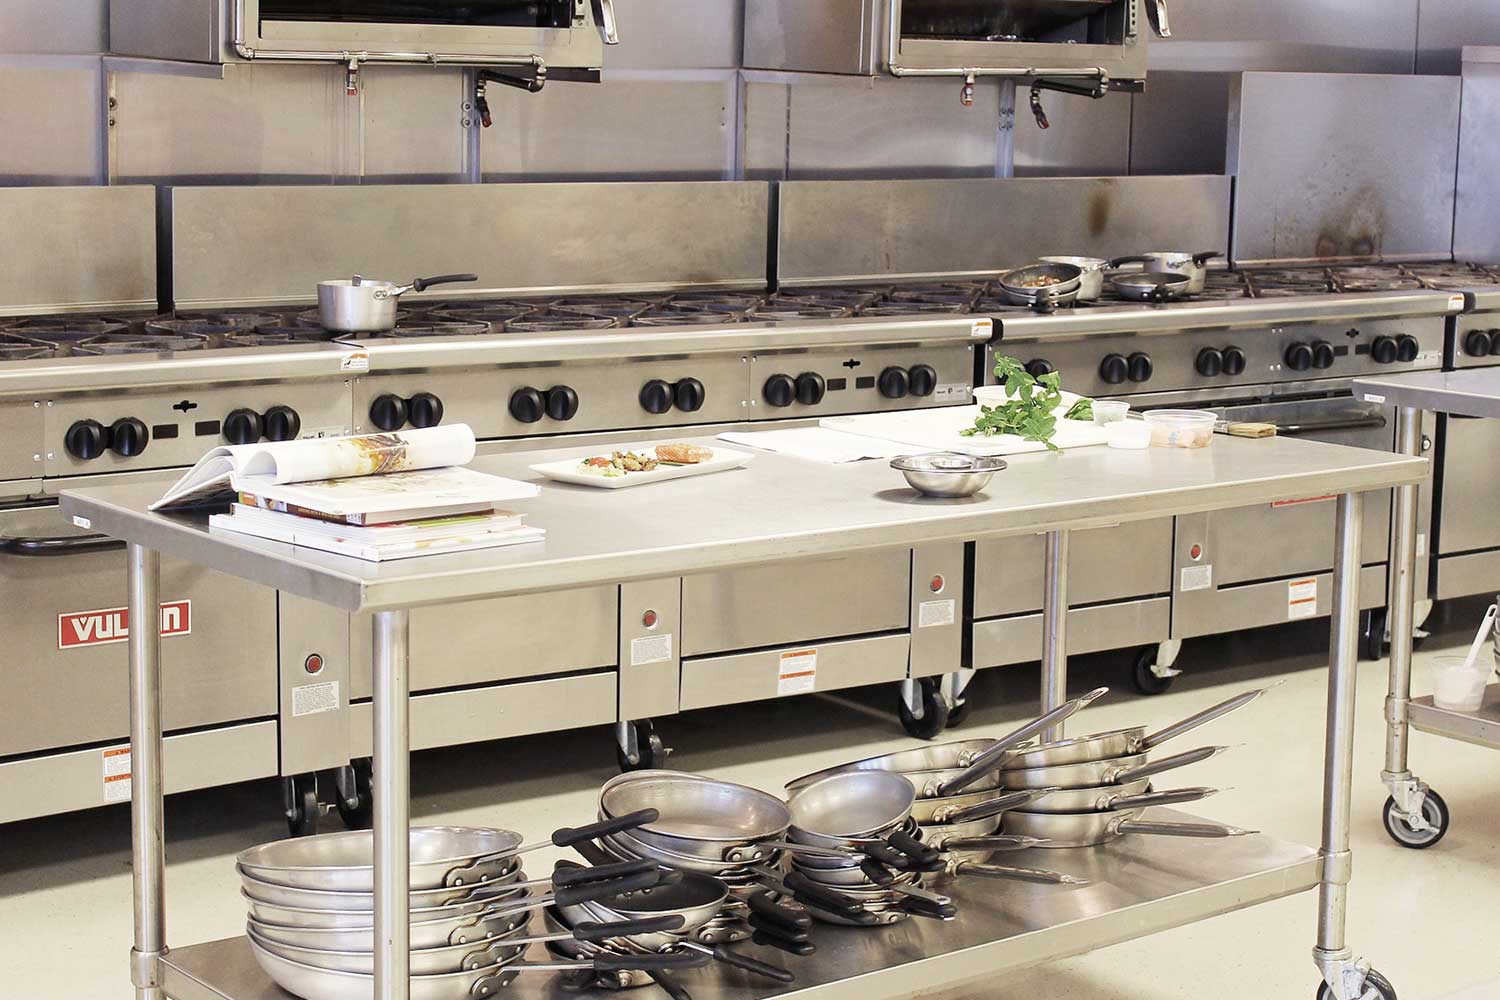 Lift-A-Lid wheelie bins are suitable for commercial kitchens